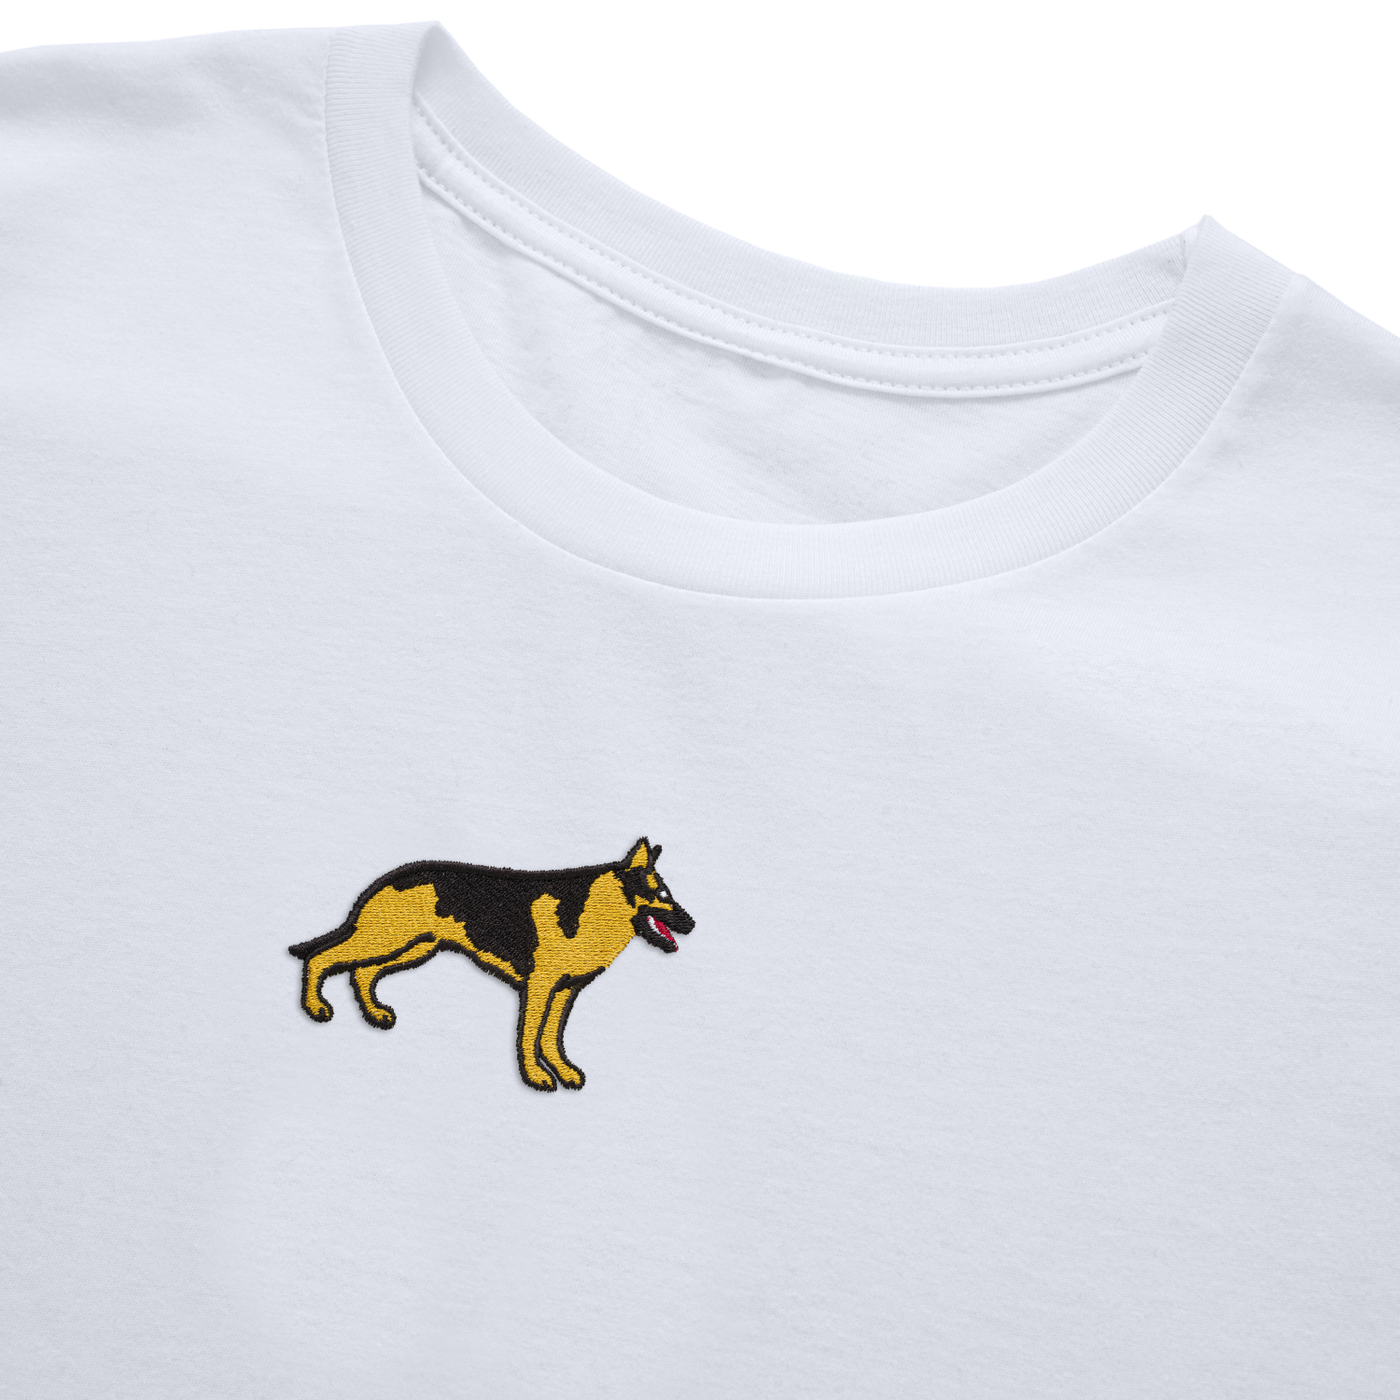 Bobby's Planet Women's Embroidered German Shepherd Long Sleeve Shirt from Paws Dog Cat Animals Collection in White Color#color_white